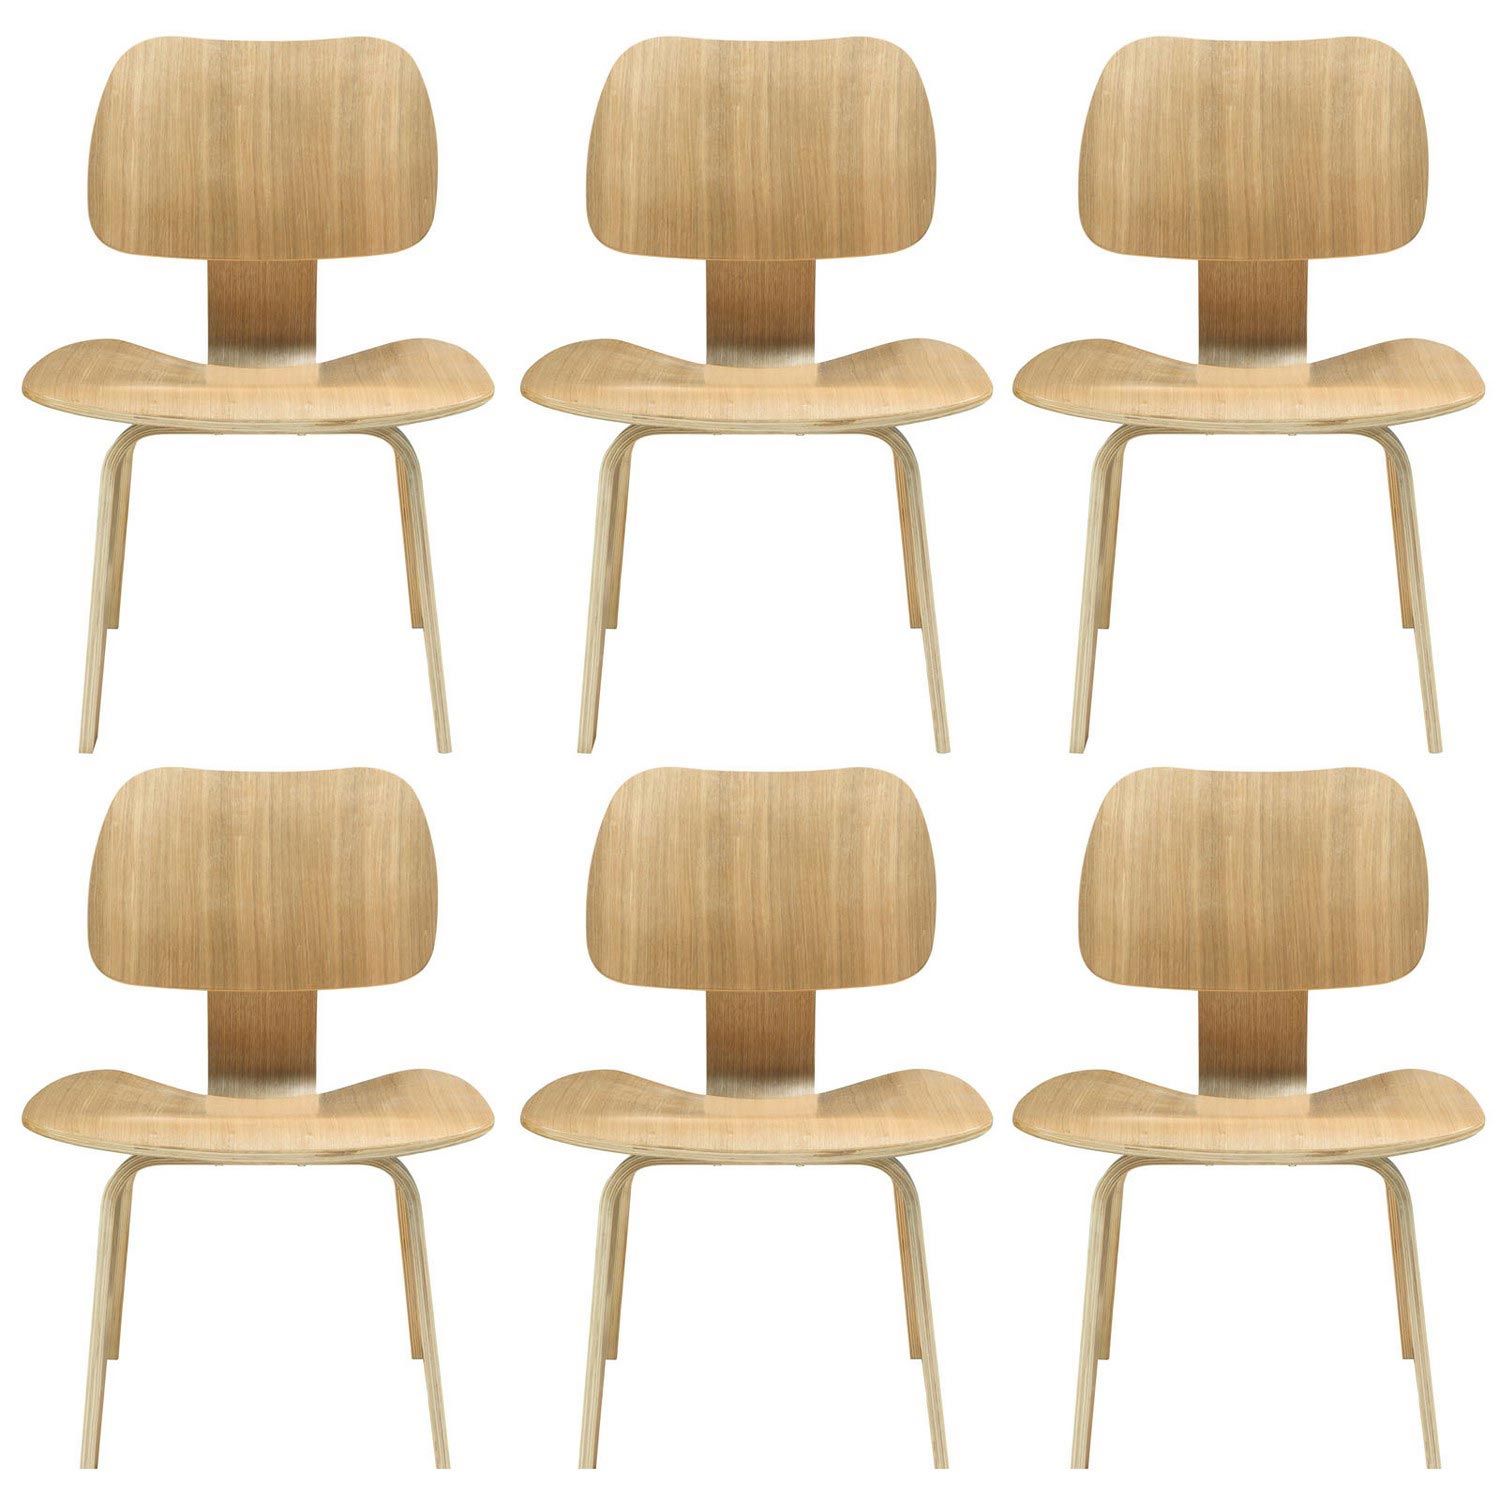 Modway Fathom Dining Chairs Set of 6 - Tan